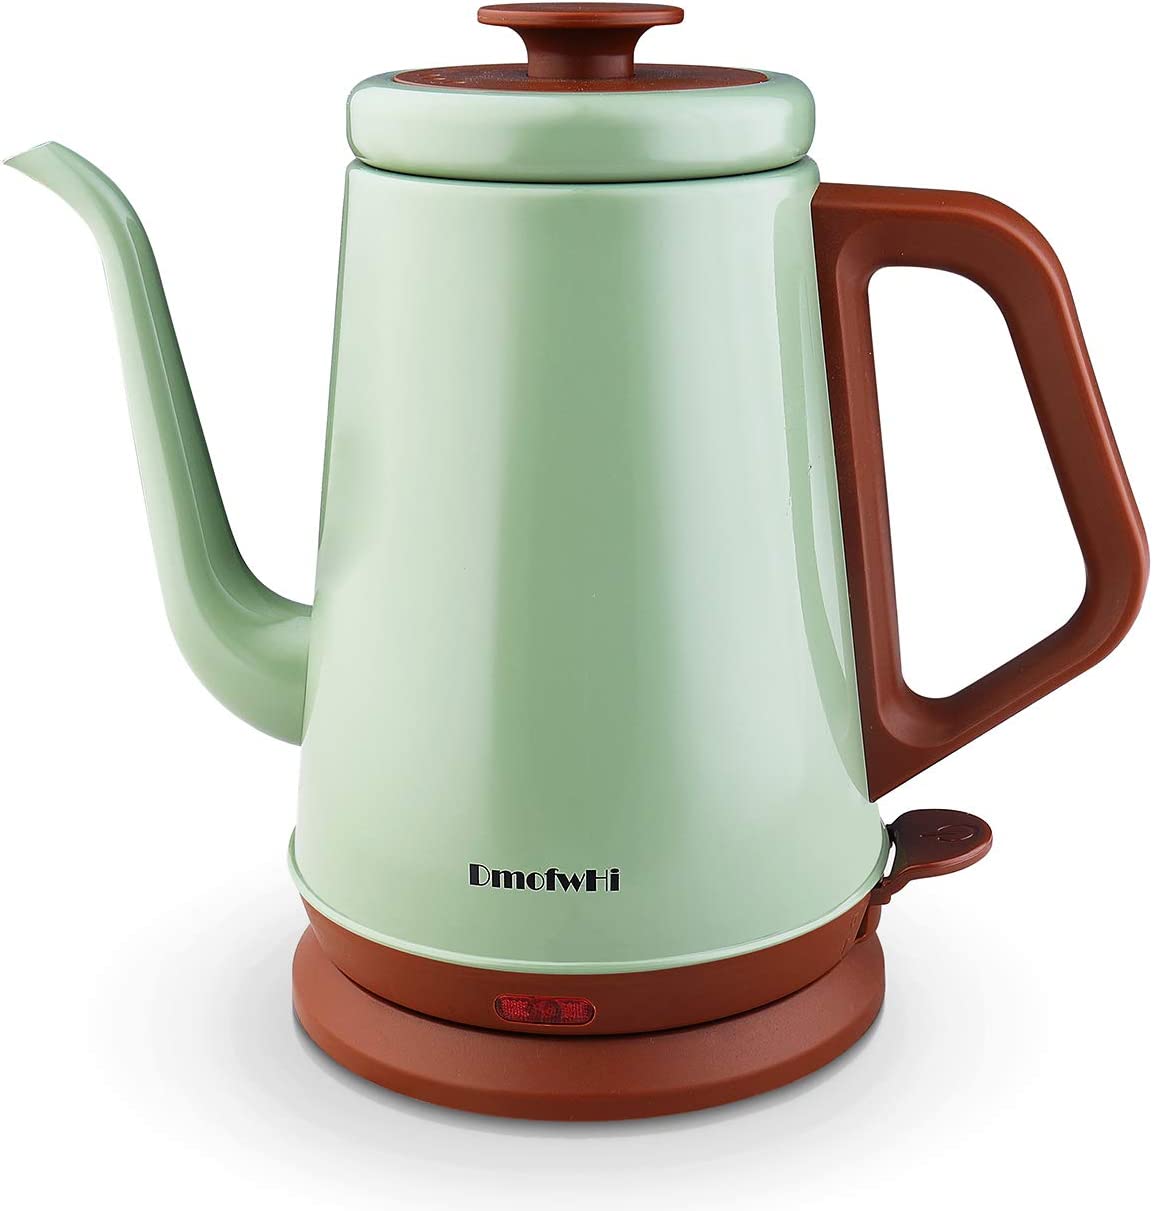 DmofwHi Gooseneck Electric Kettle(1.0L), 100% Stainless Steel BPA Free Classic Pour Over Coffee Kettle | Tea Kettle – Green